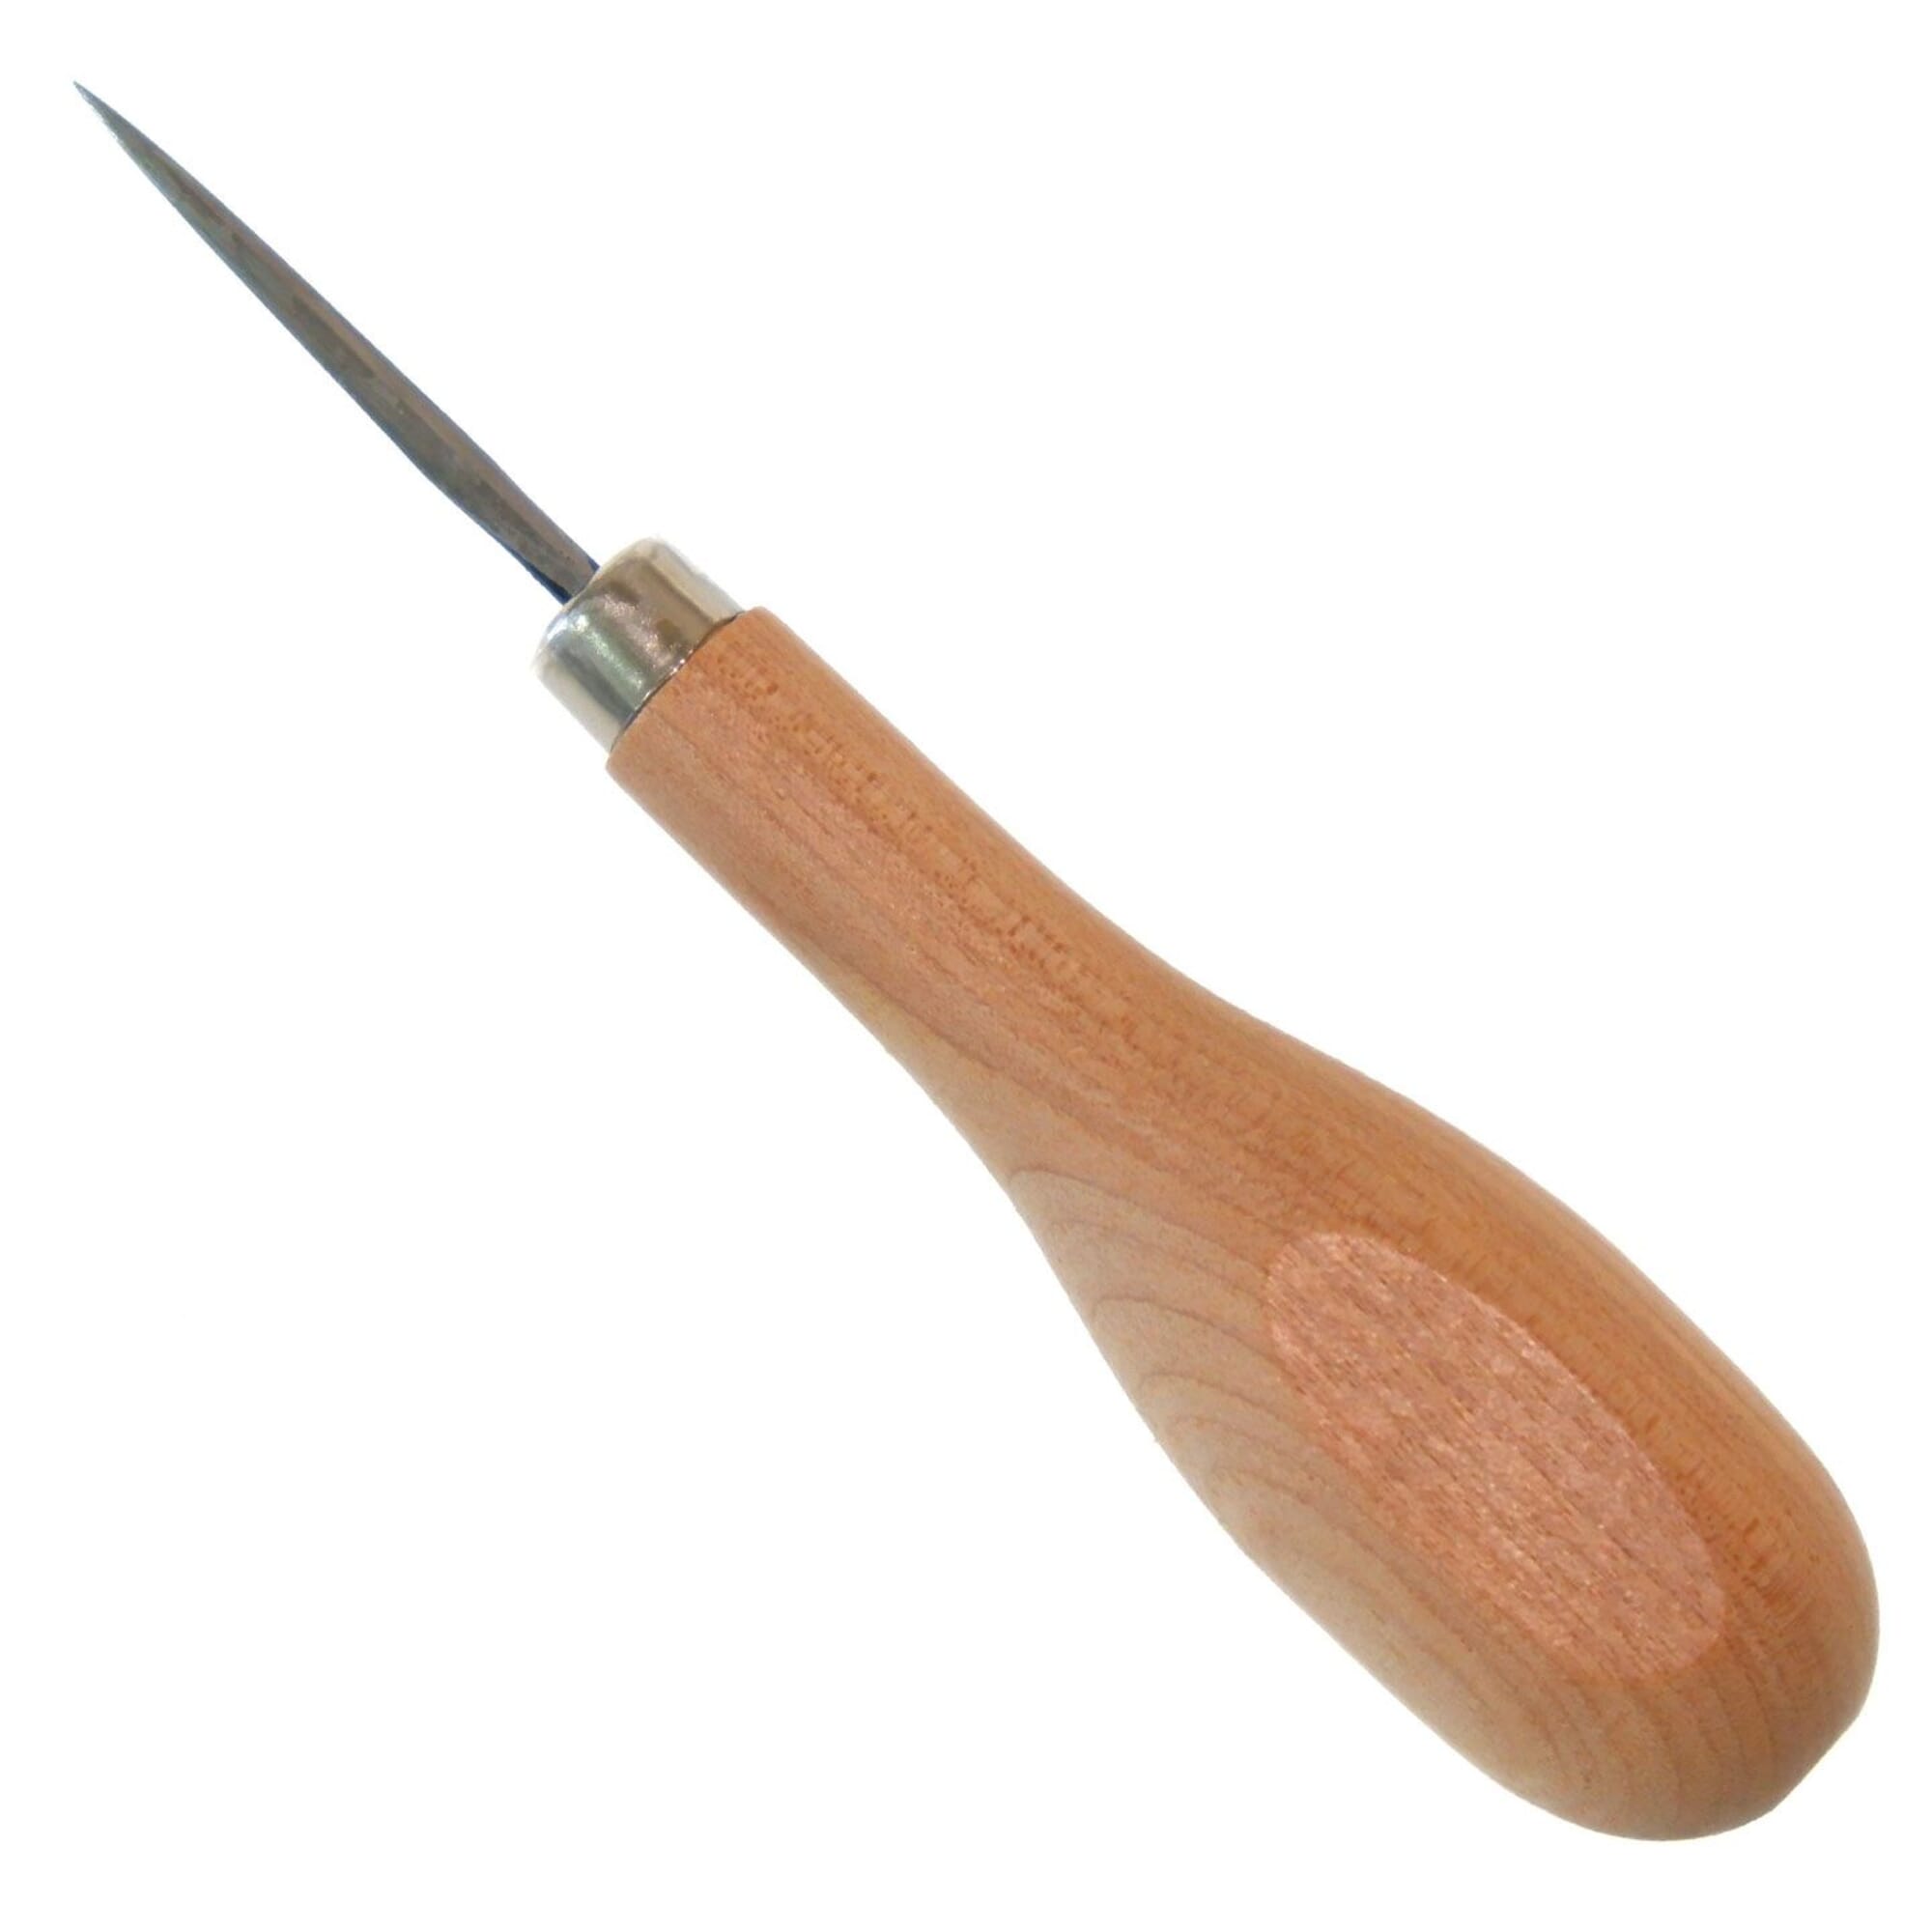 STEWART MANUFACTURING Seamstress - awl with thread